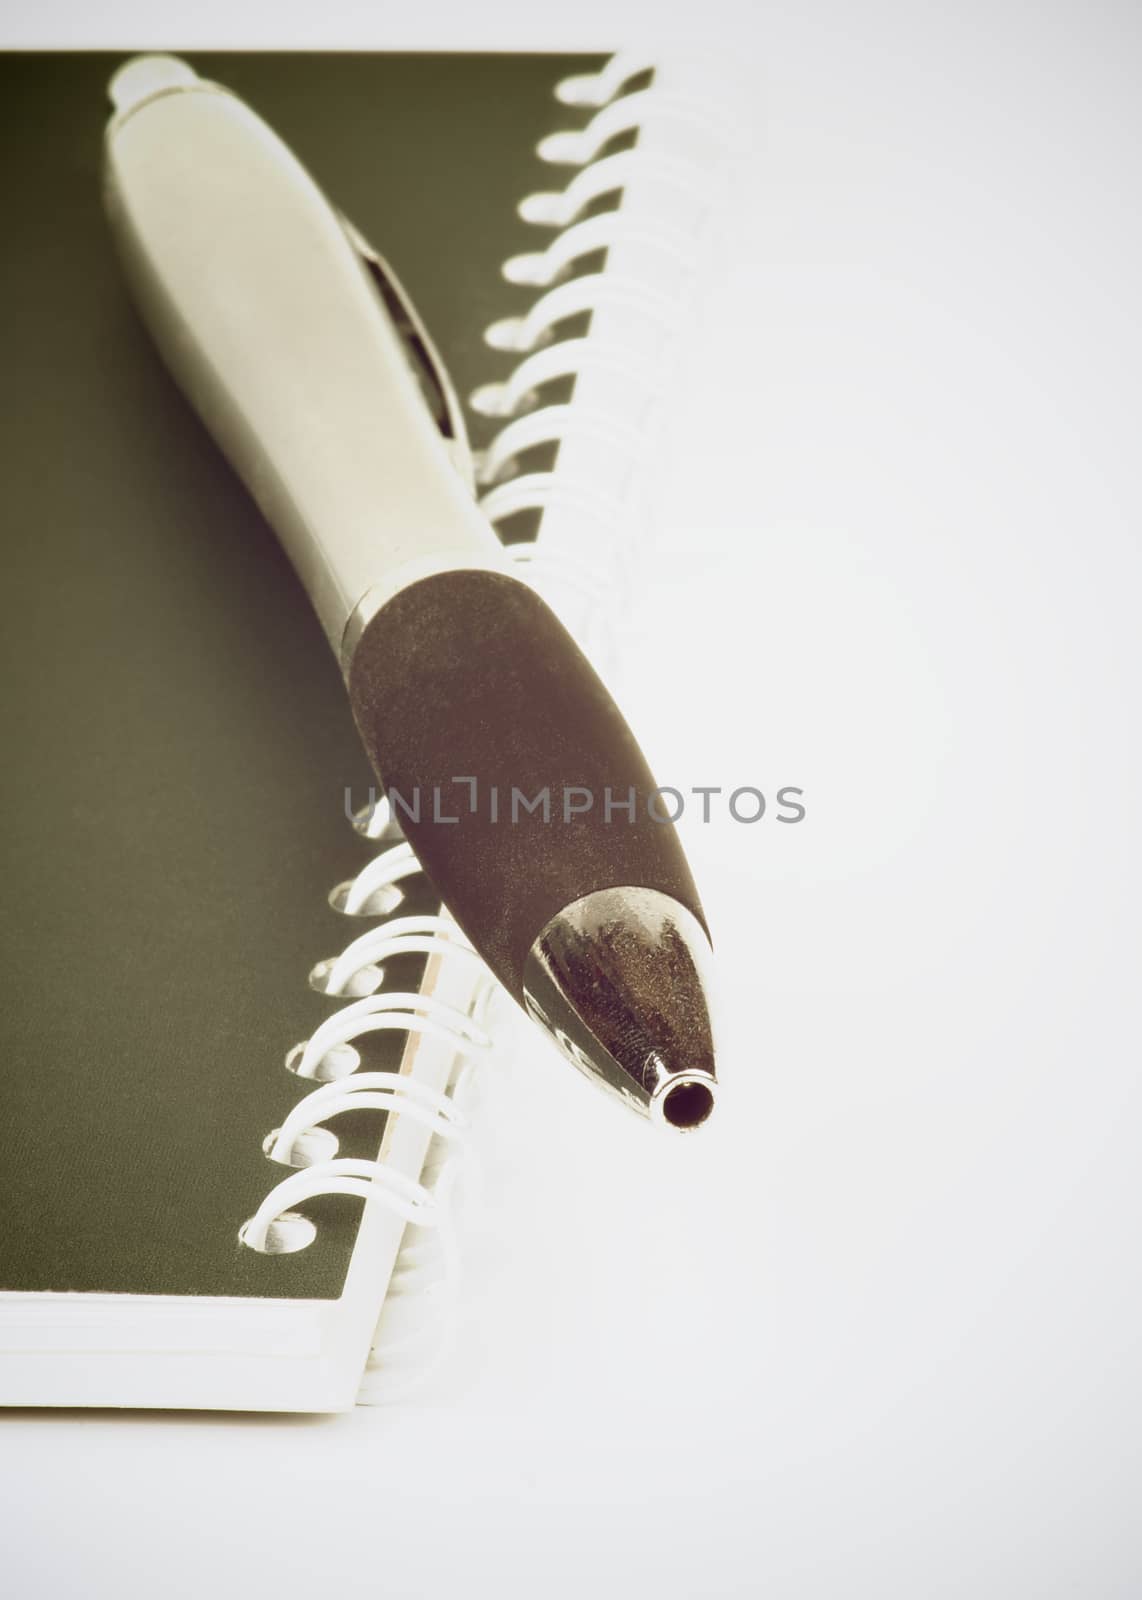 Black and Silver Pen on Dark Green Spiral Notepad on white background. Retro Styled